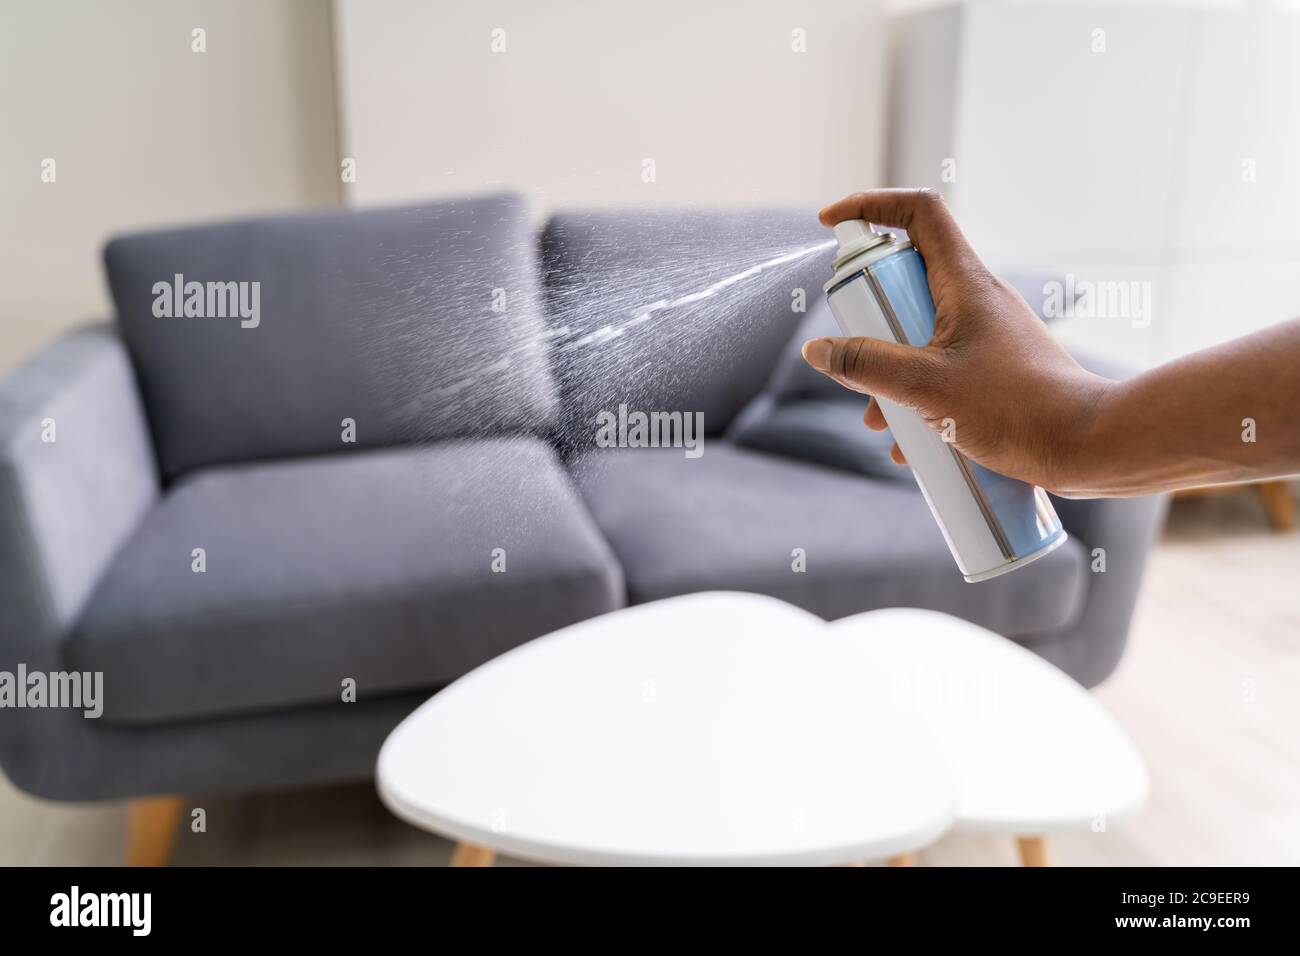 African Woman Using Living Room Air Spray Stock Photo